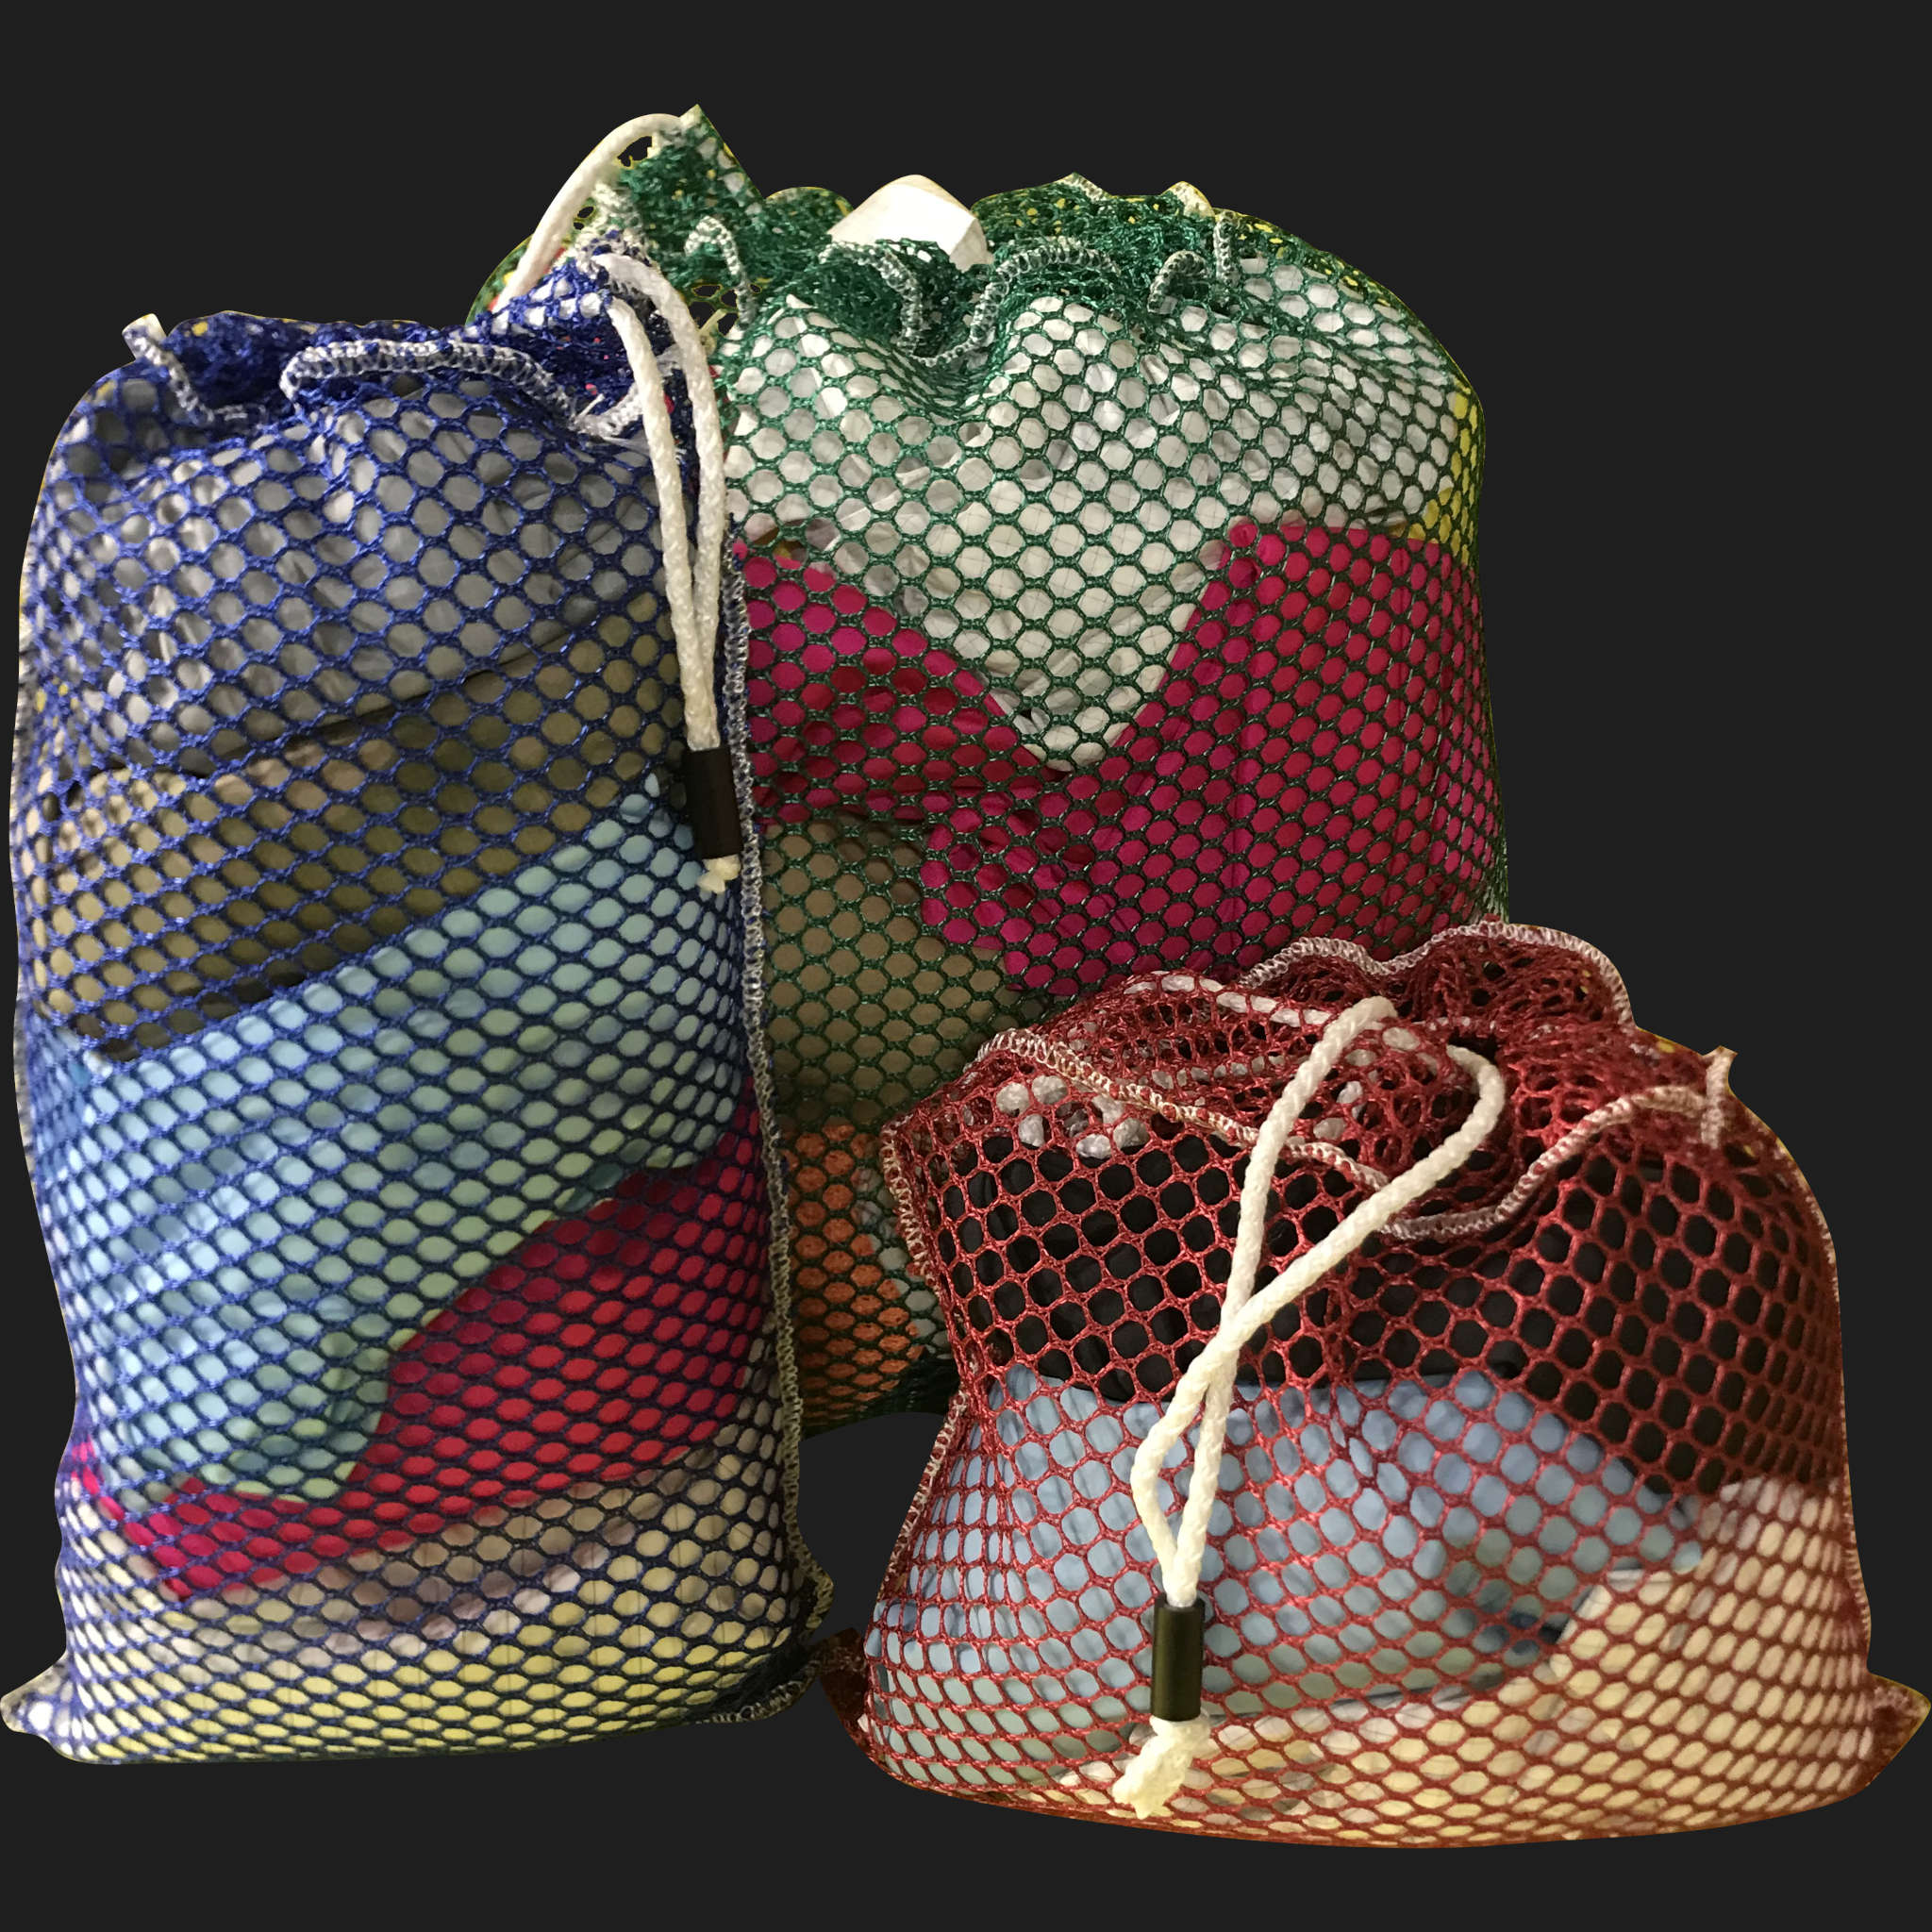 38" x 50" Customized Mesh-Net-Laundry Bags Heavy Duty with Cord and barrellock closure